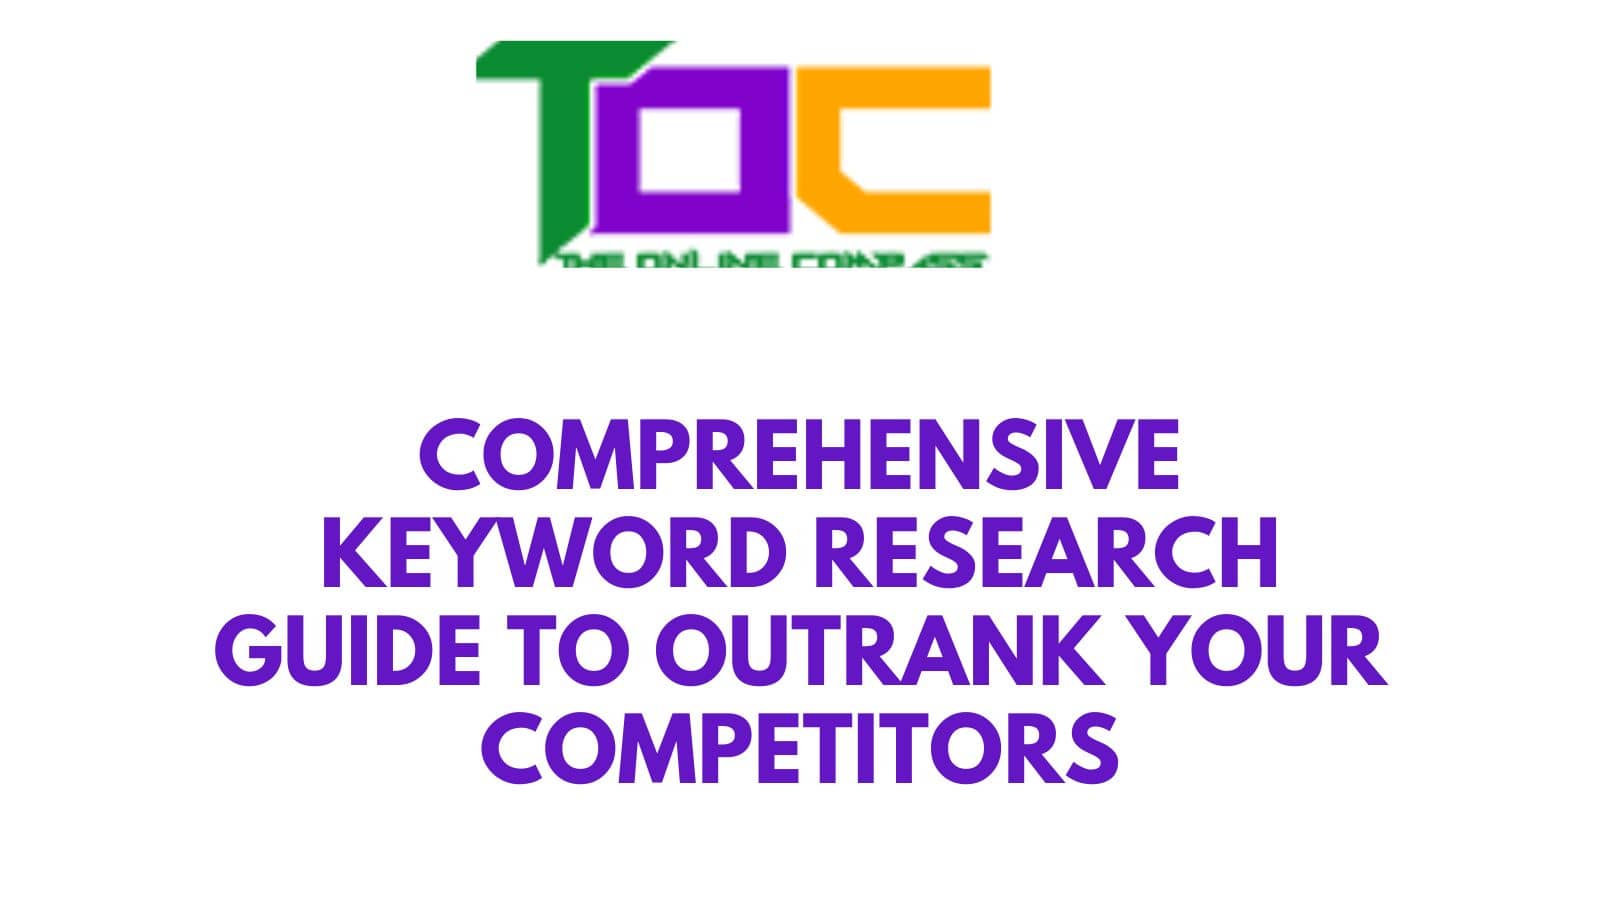 Comprehensive keyword research guide to outrank your competitors